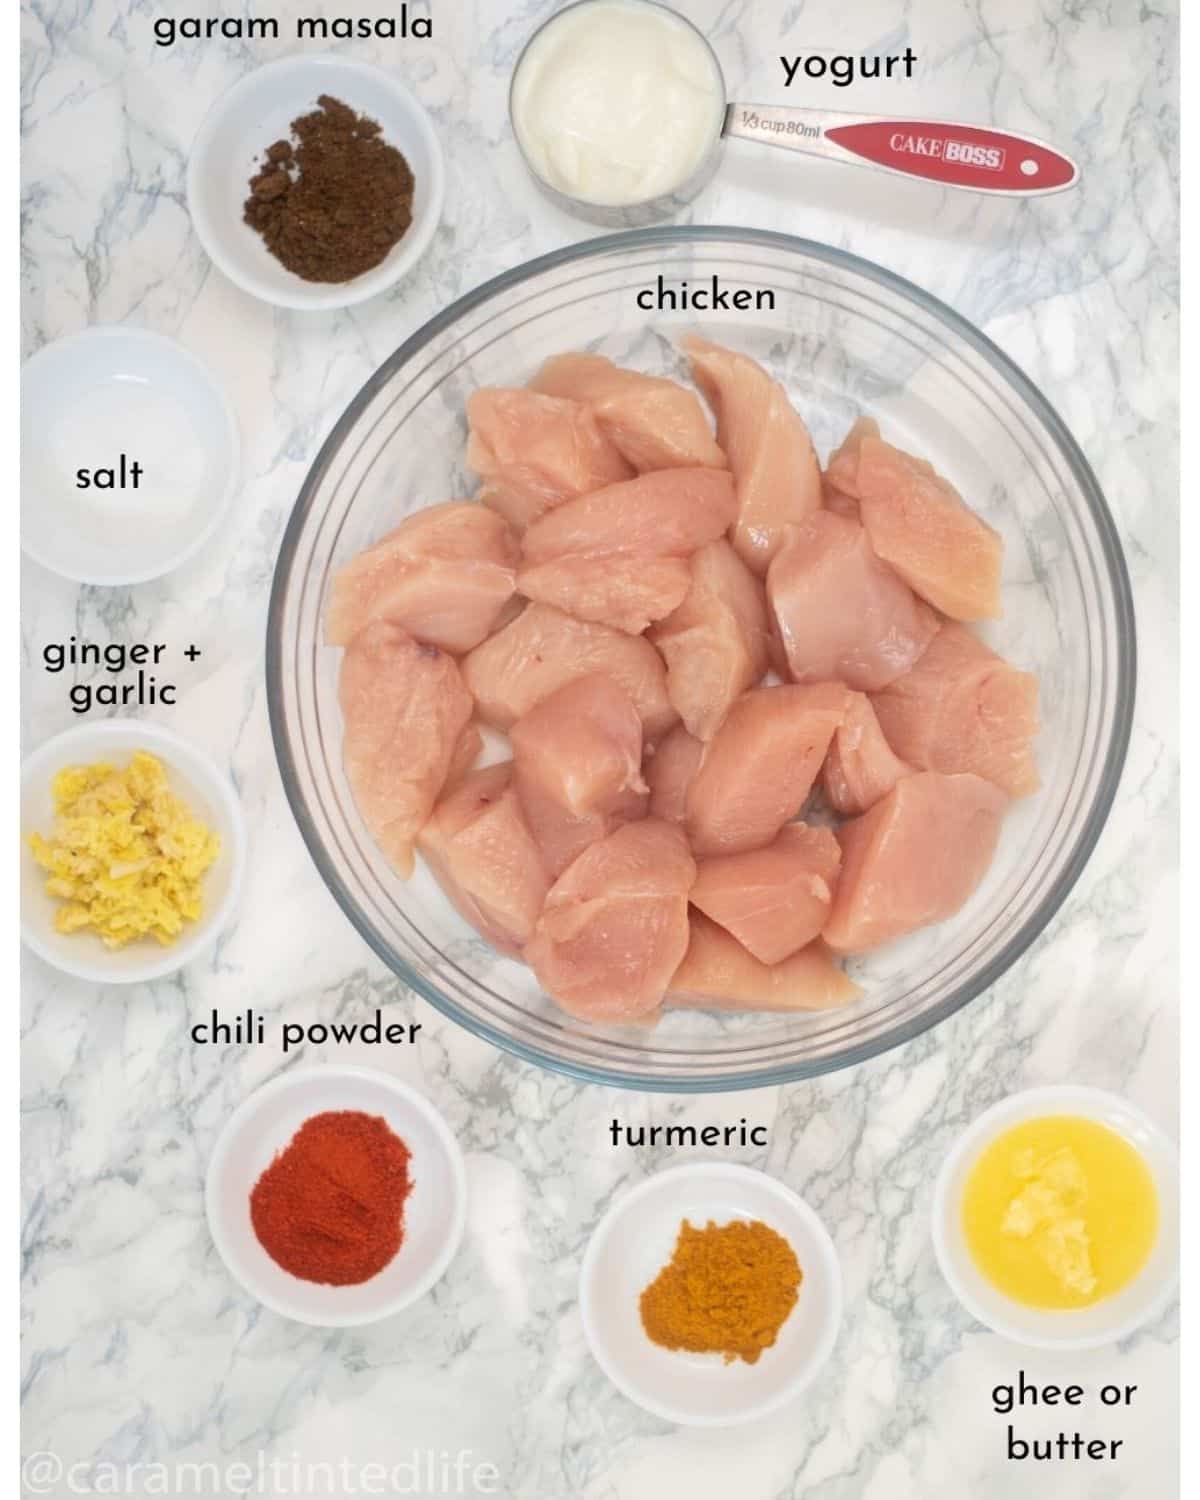 All the ingredients required for marinating chicken for butter chicken